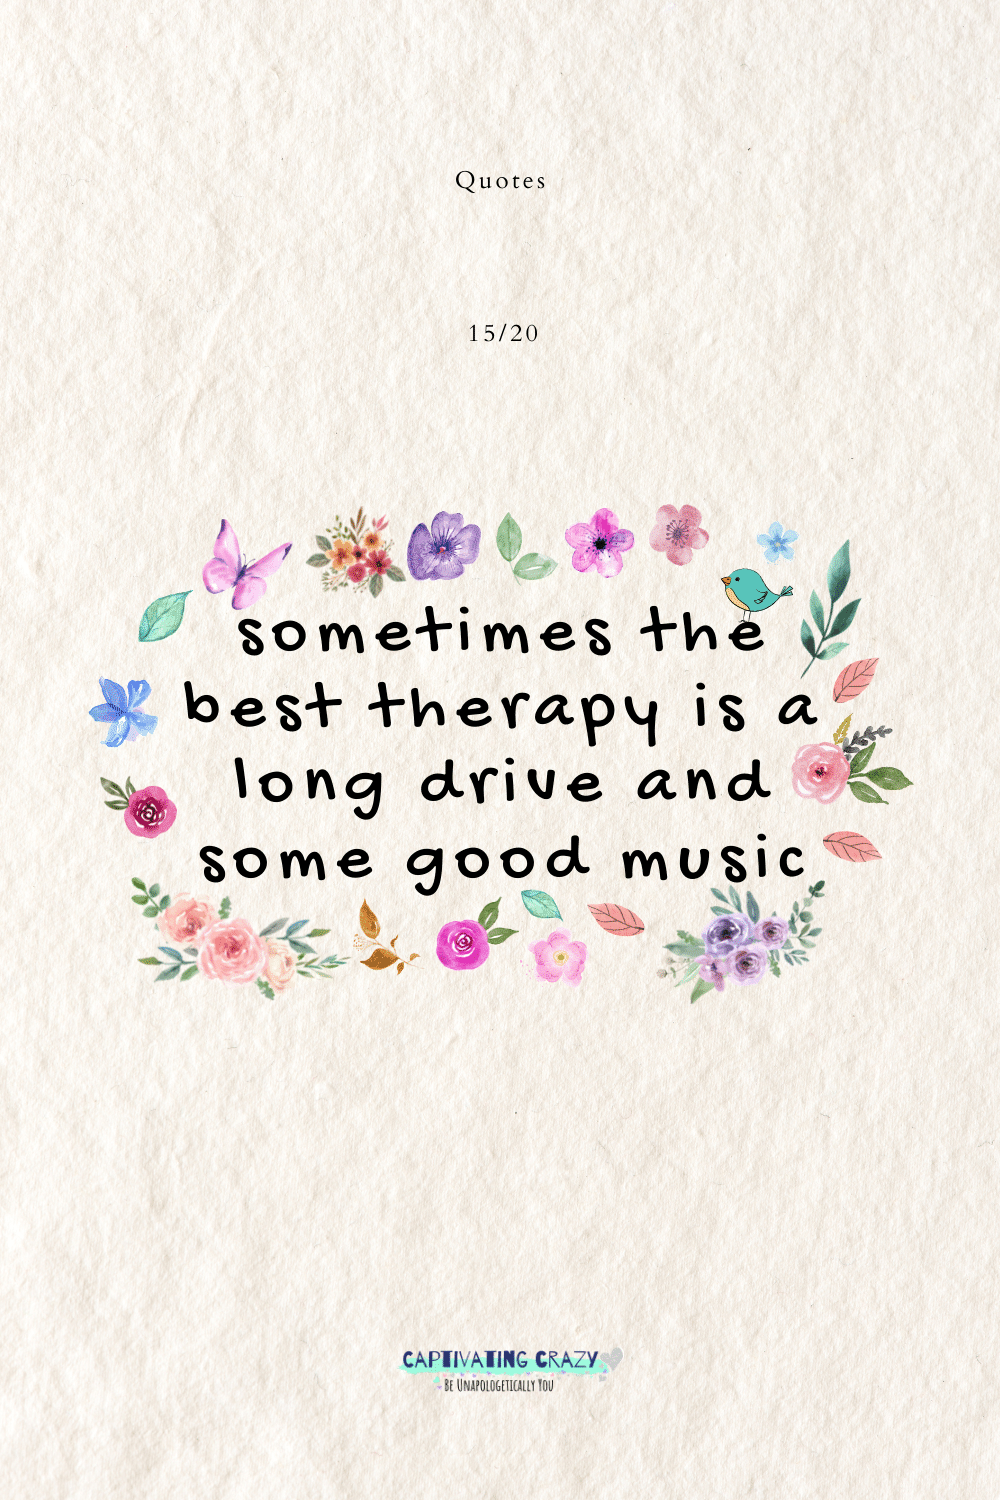 Sometimes the best therapy is a long drive and some good music.